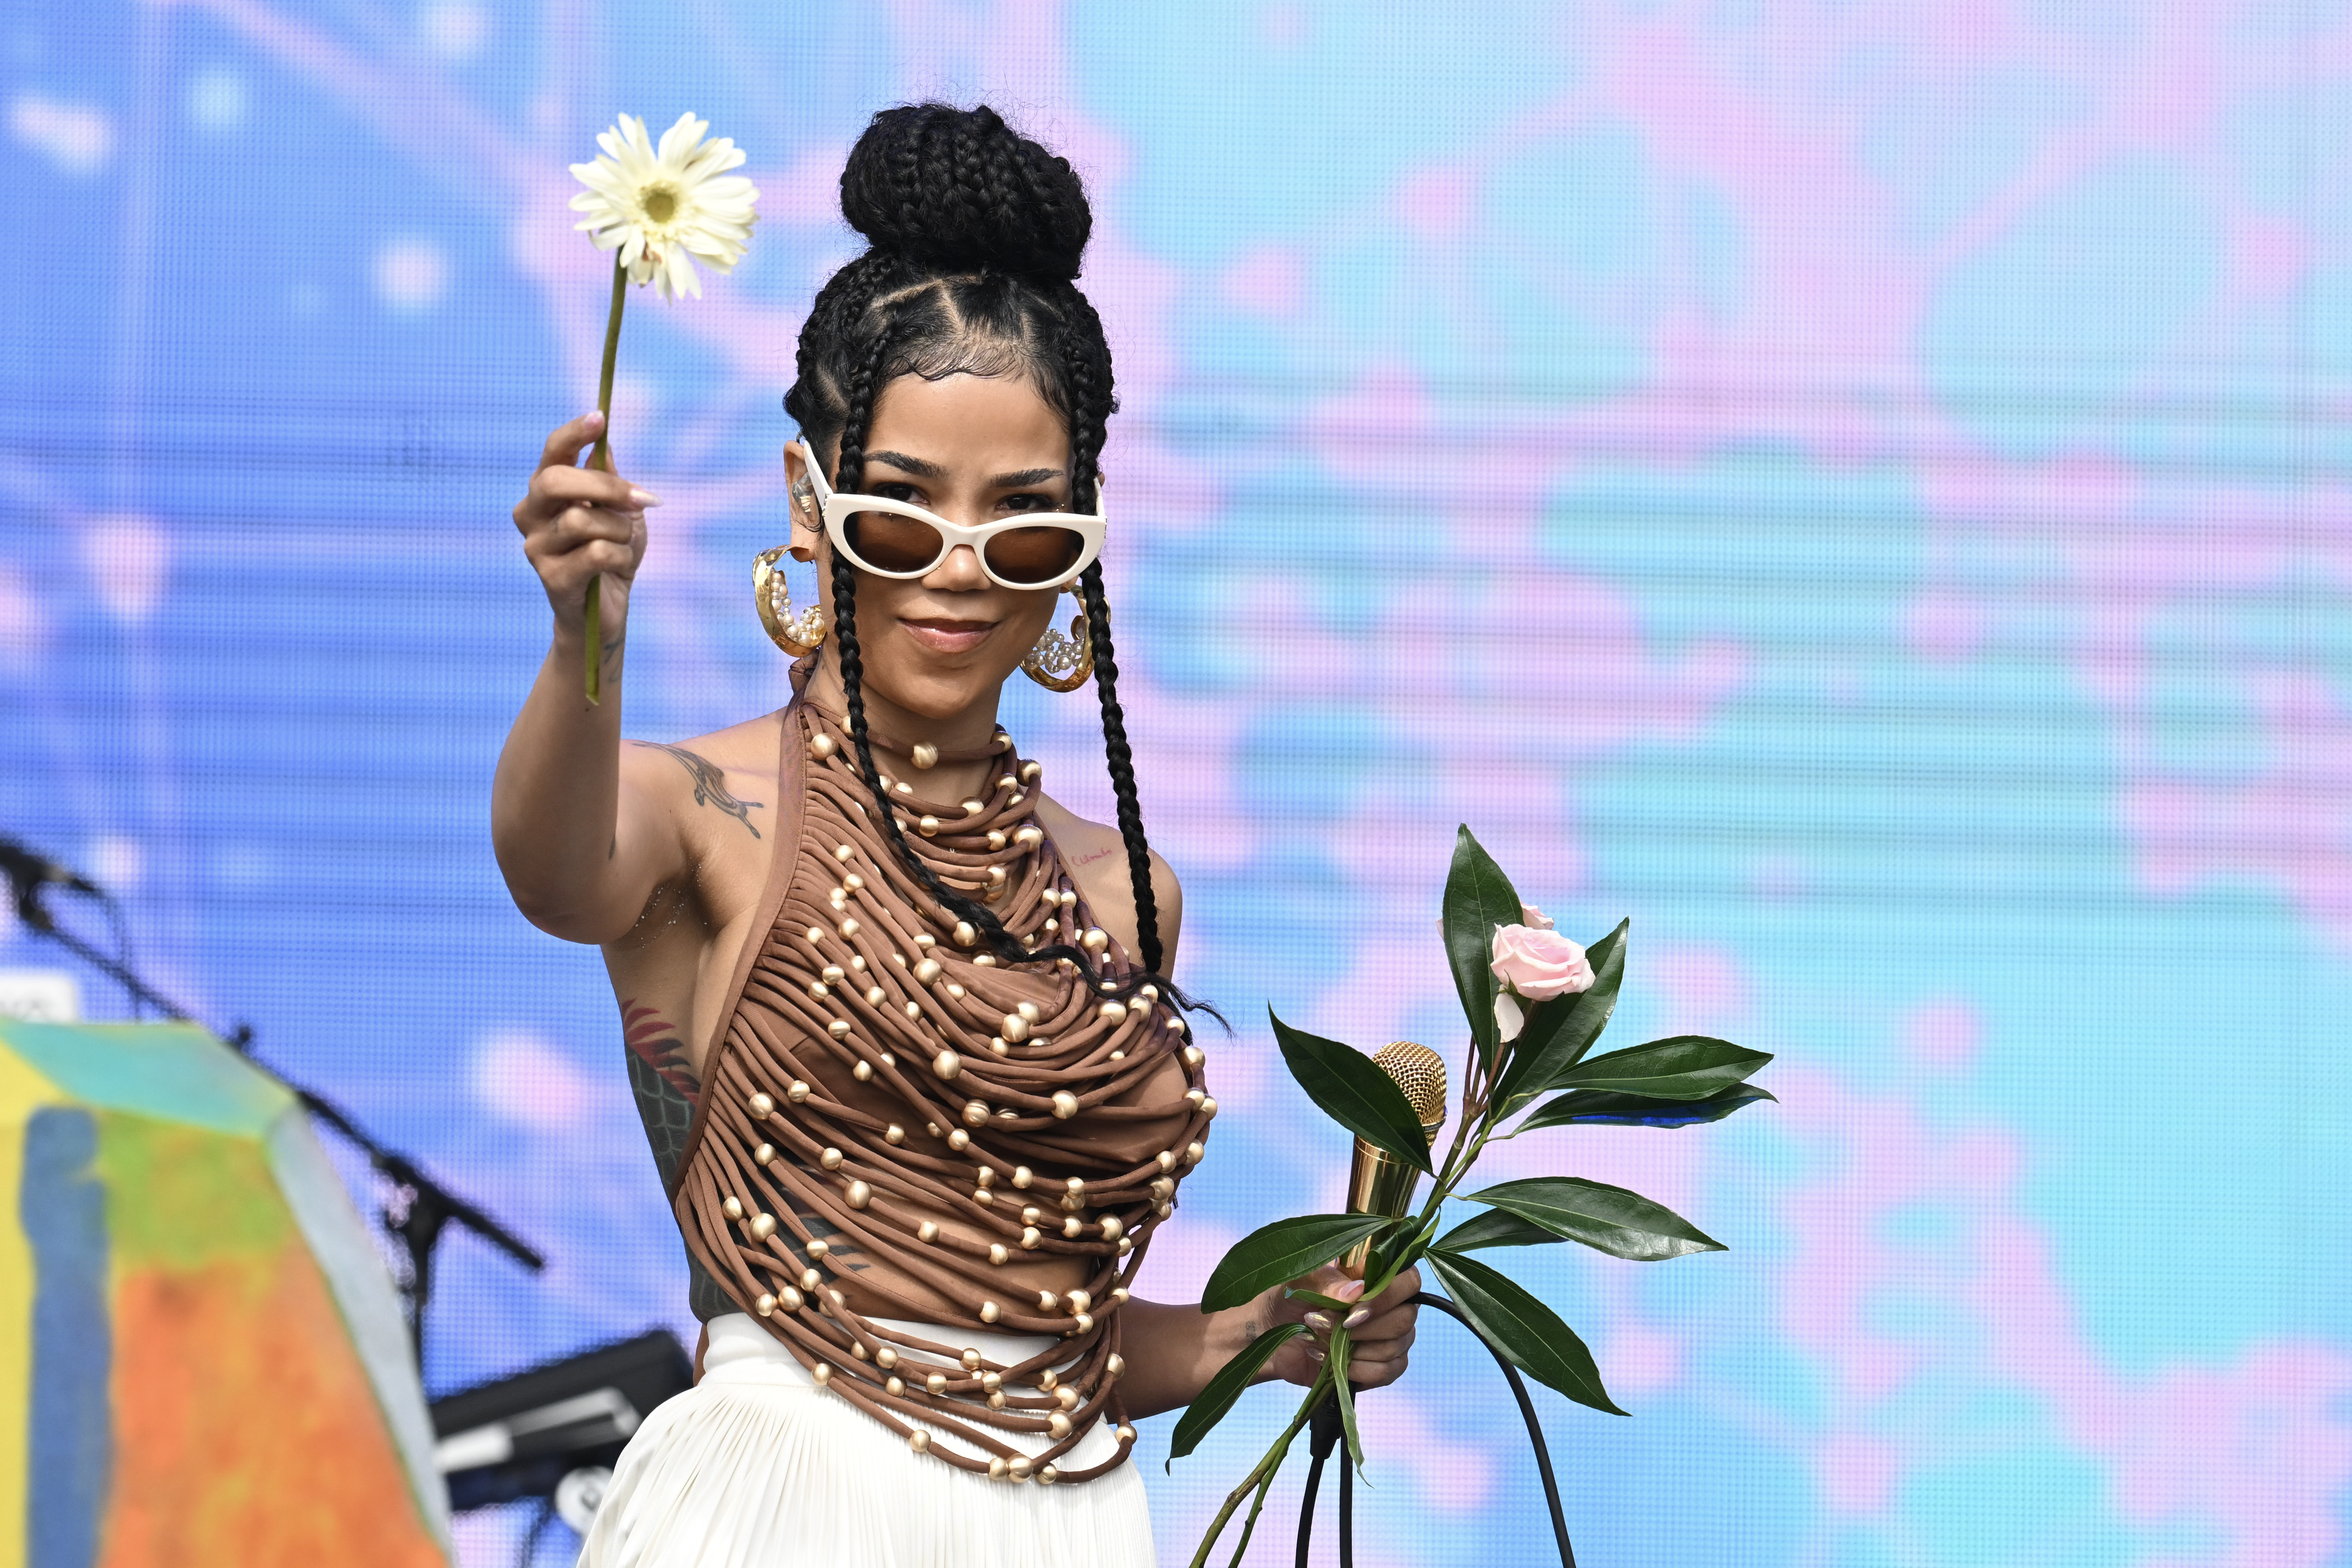 Jhené Aiko performs during the Lovers & Friends music festival at the Las Vegas Festival Grounds on May 6, 2023, in Las Vegas, Nevada. | Source: Getty Images